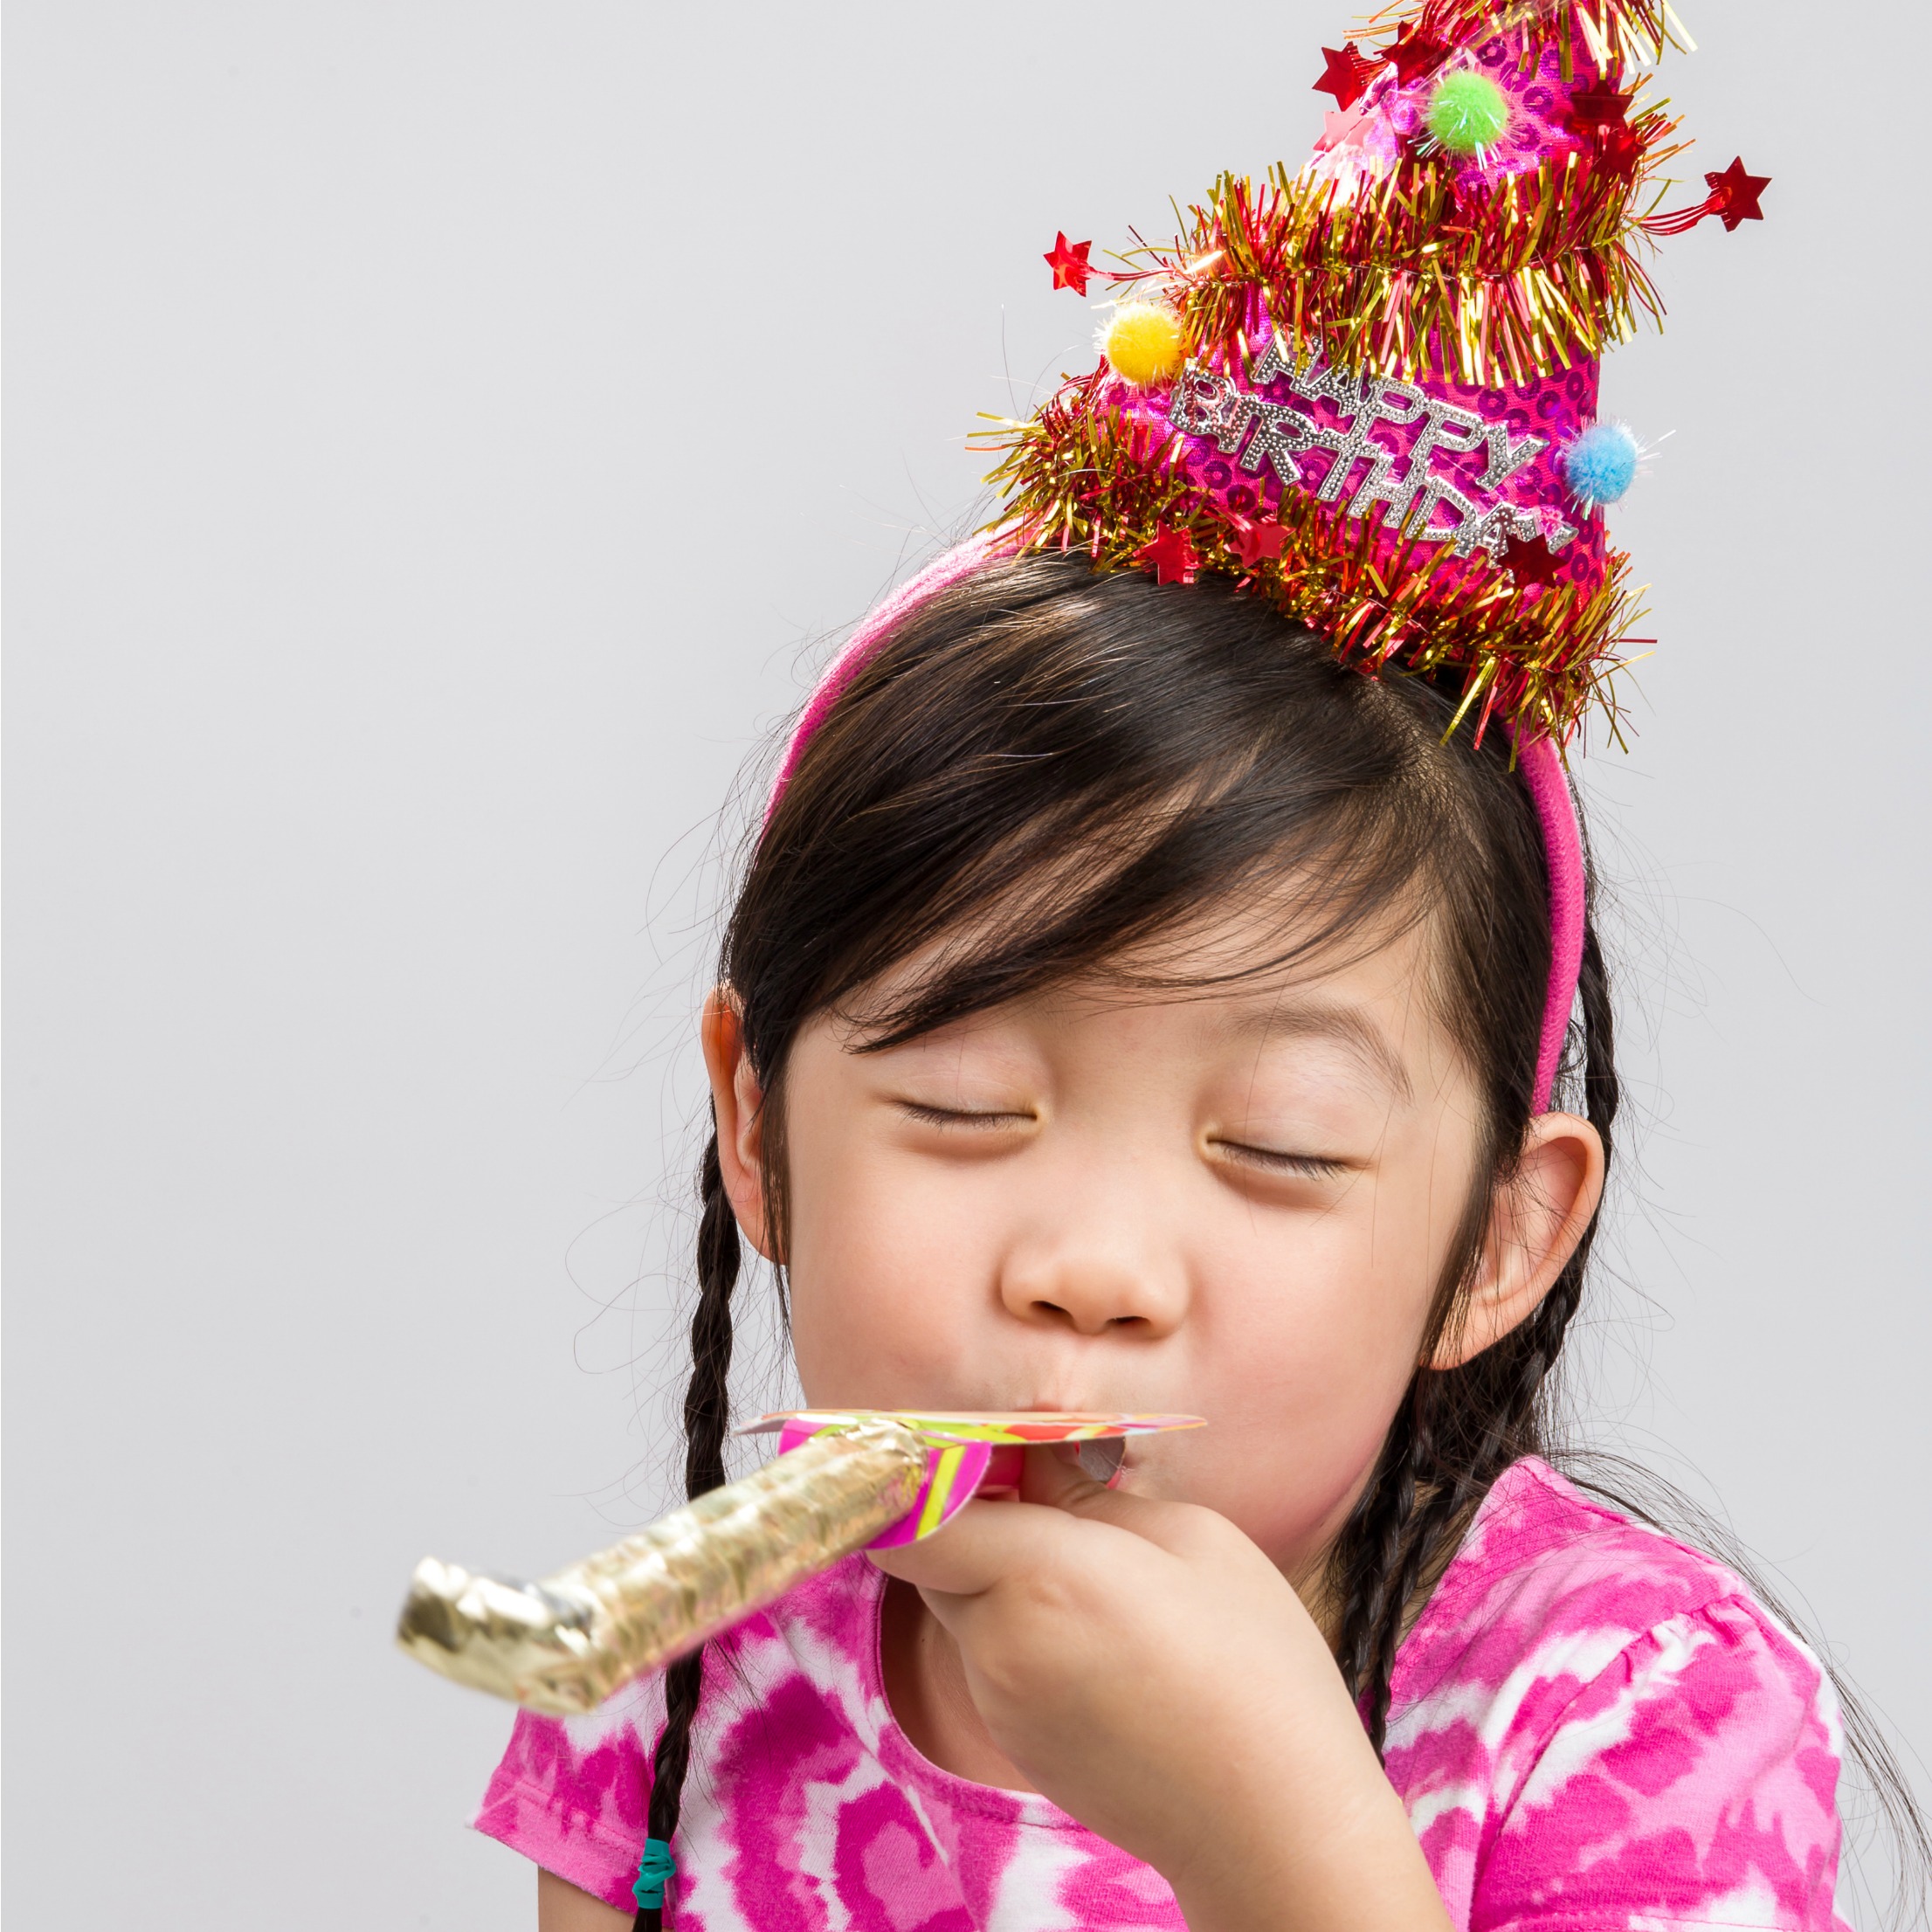 15 Ways to Make Birthdays Special (Without Throwing a Big Party!)